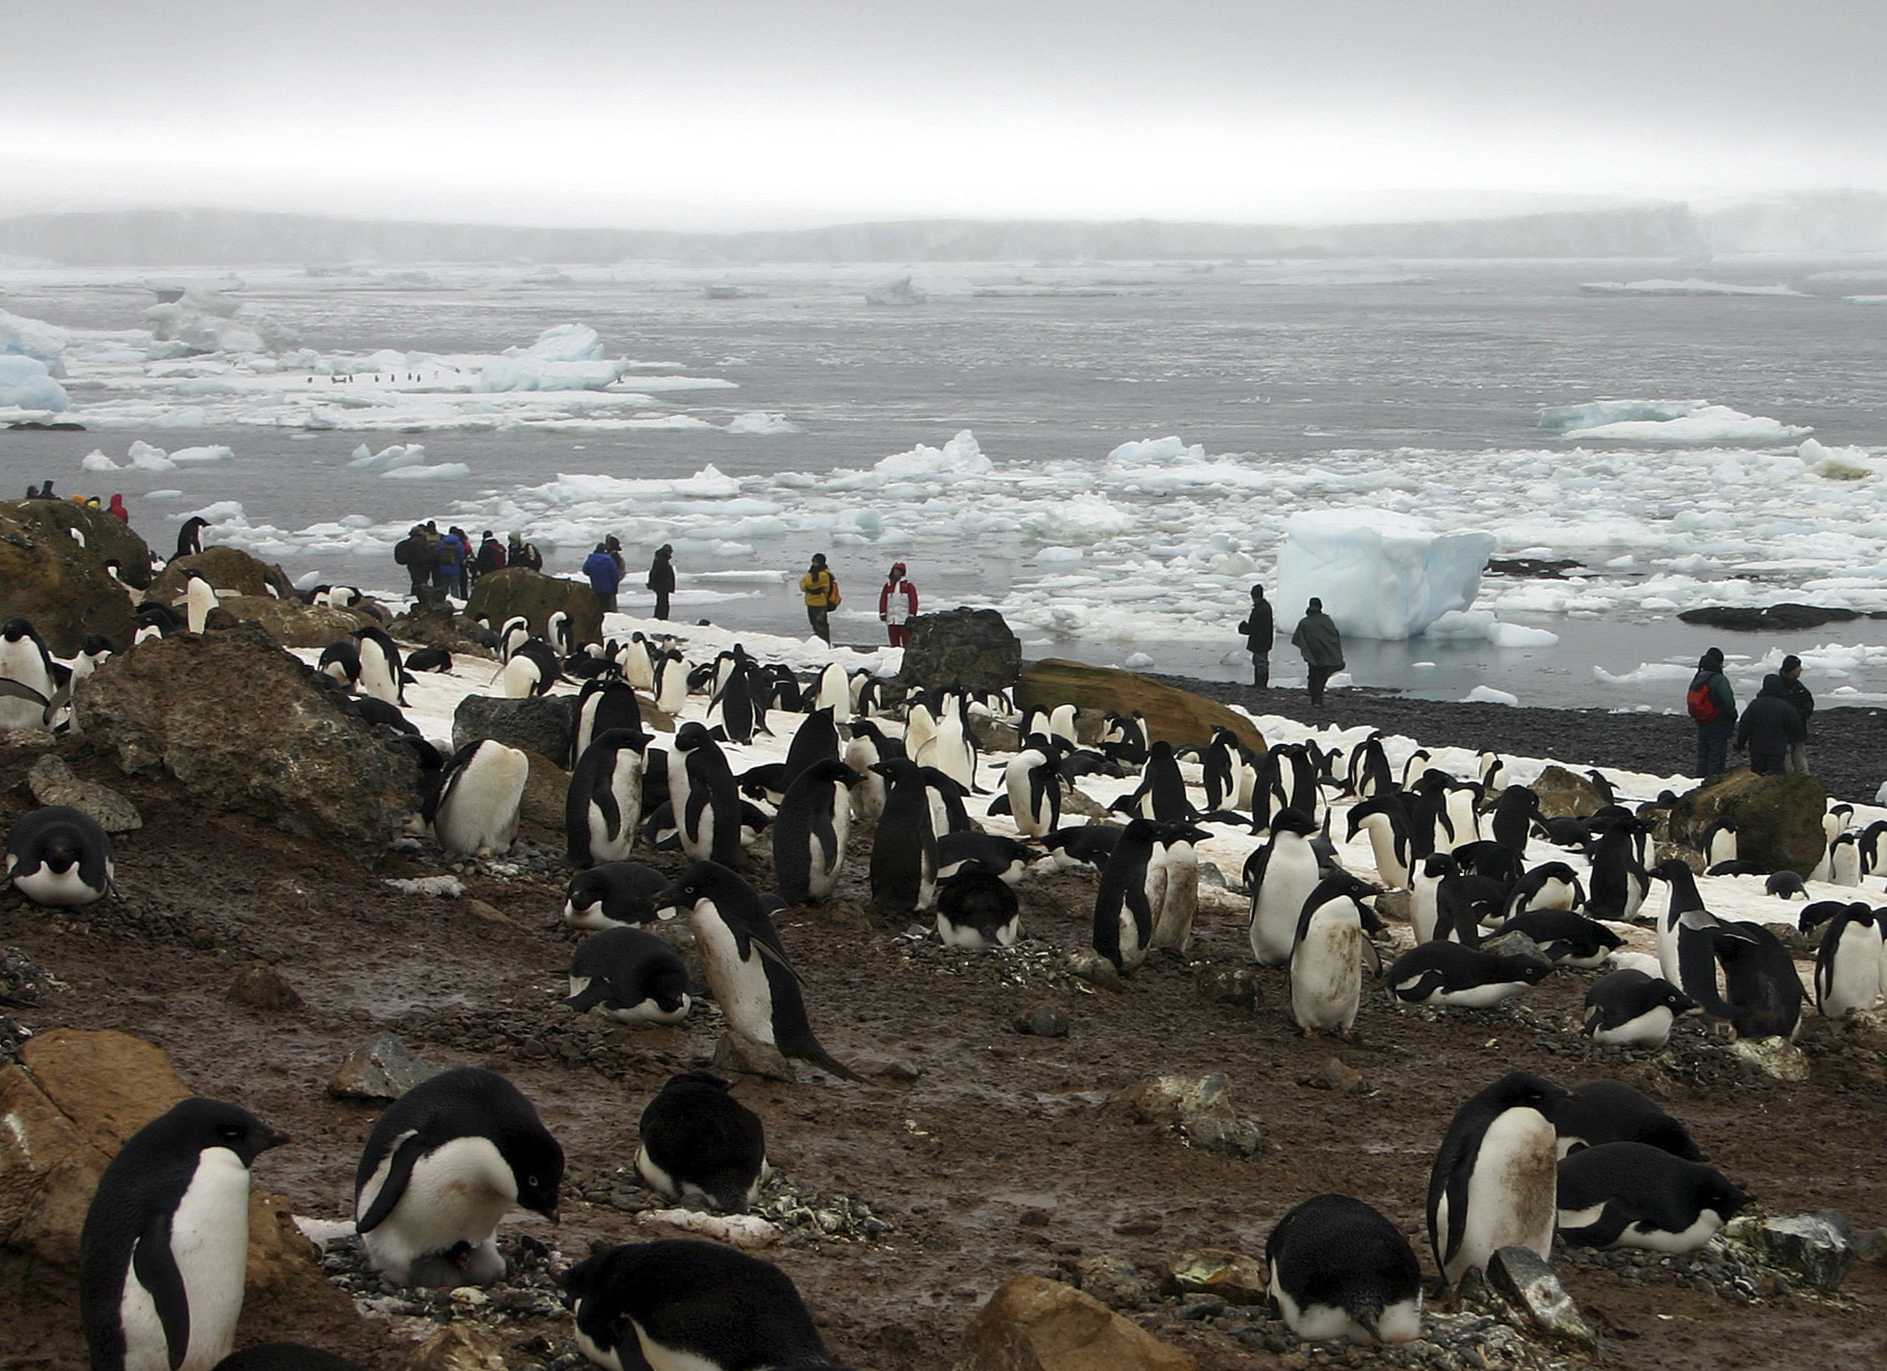 Previously unknown colony of 1.5 million penguins found on Antarctic islands